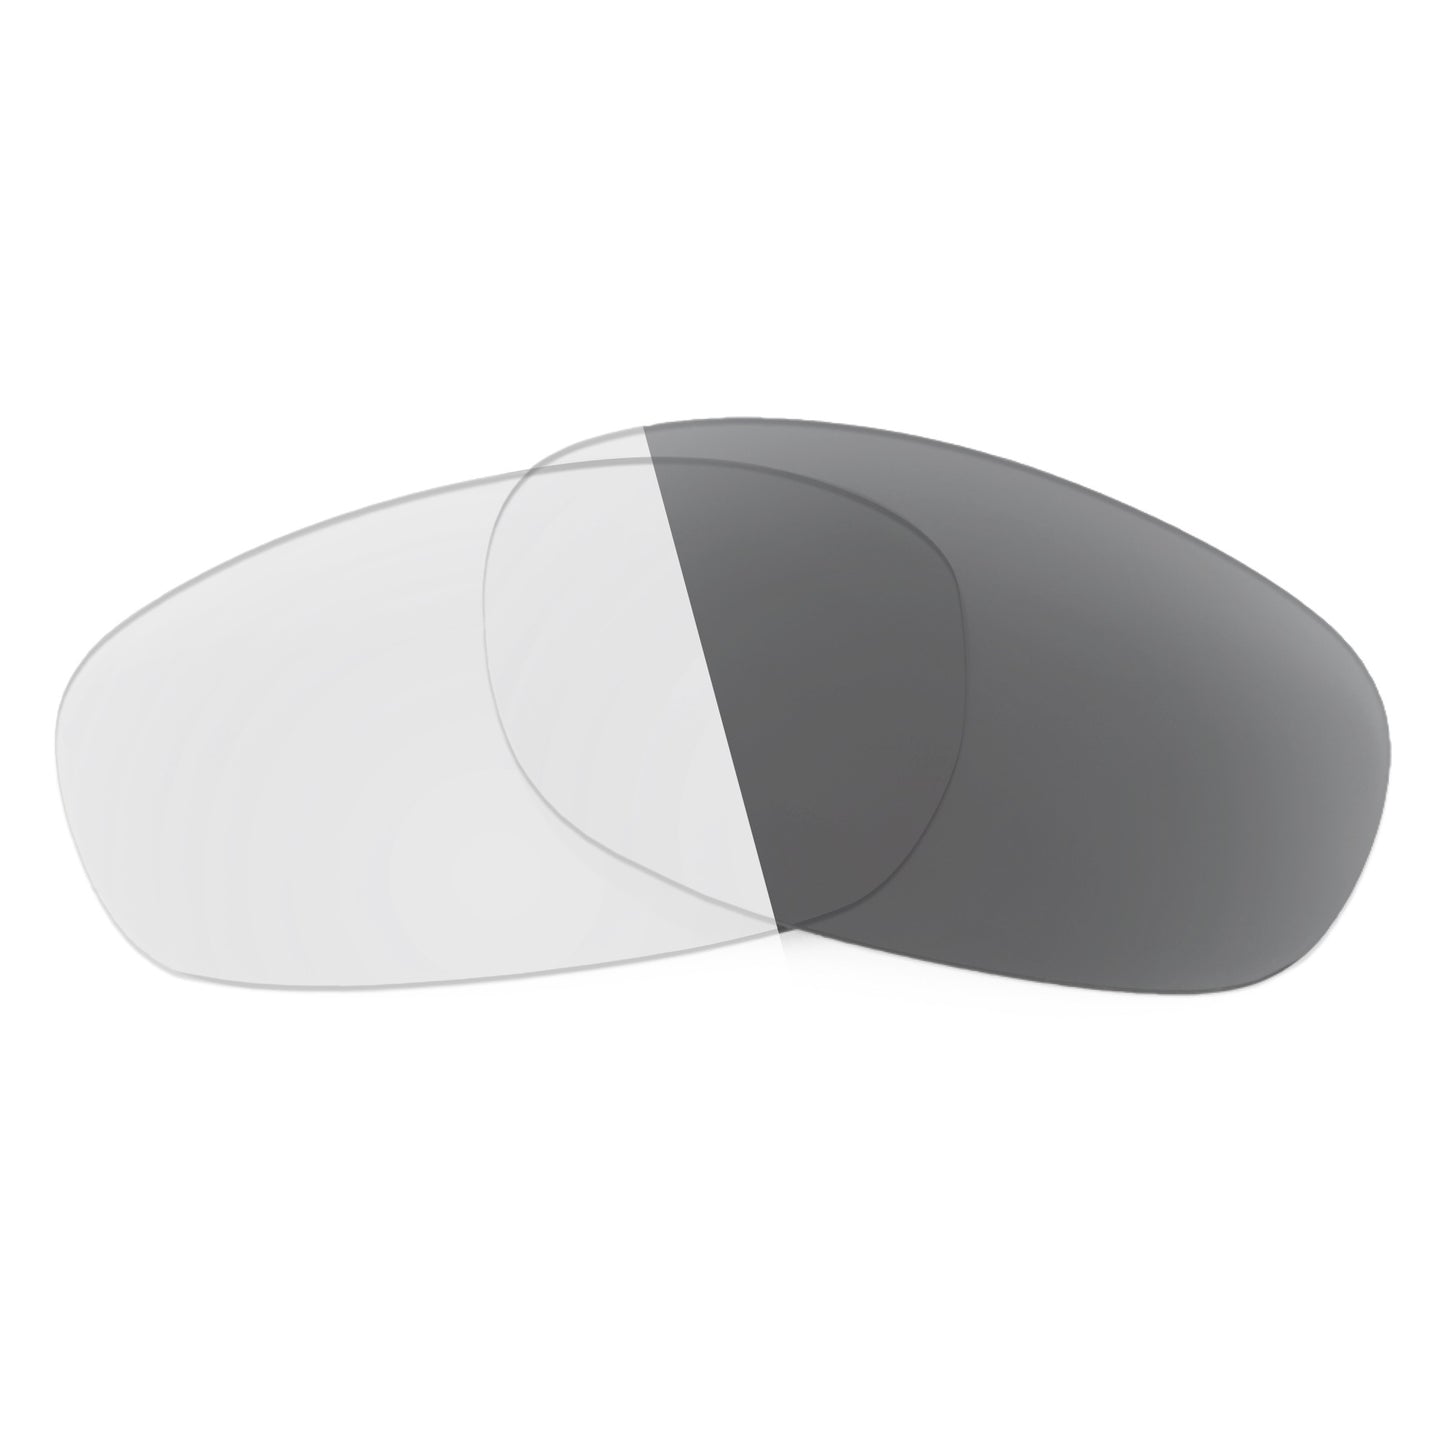 Revant replacement lenses for Ray-Ban Warrior RB3342 60mm Non-Polarized Adapt Gray Photochromic